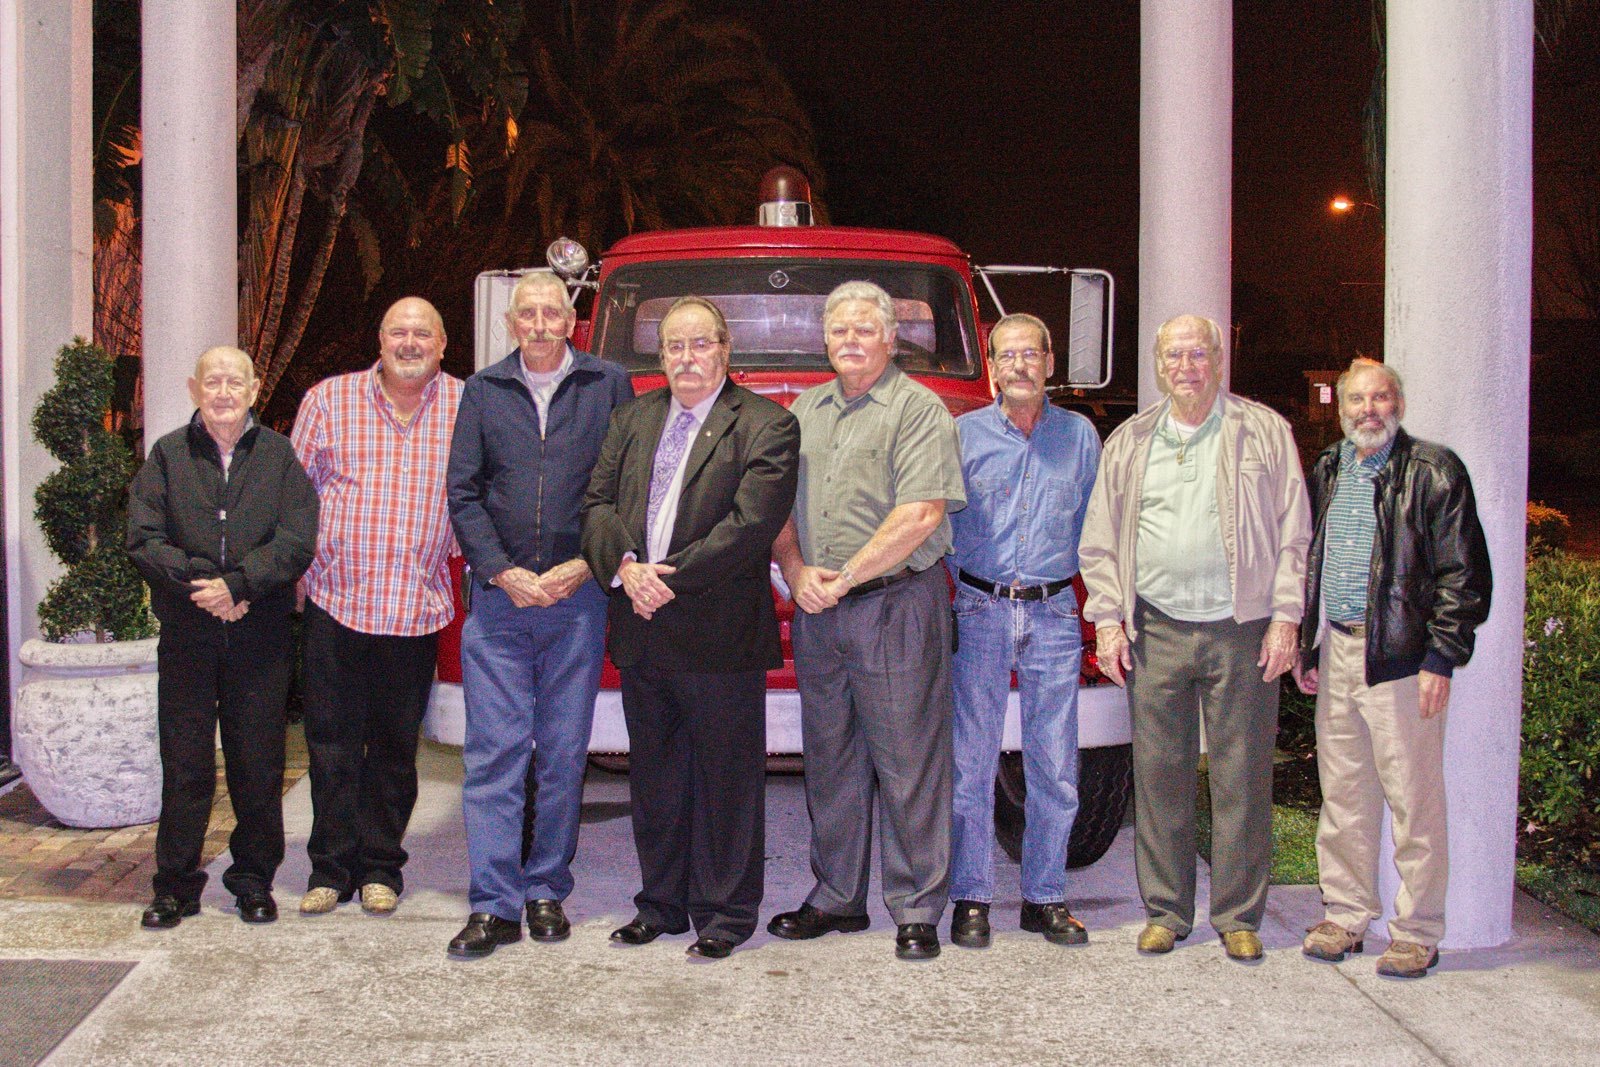 Winter Garden celebrated the 100th anniversary of the Winter Garden Fire Rescue Department in 2014. Among those recognized were former chiefs Carl Peters, left; Jim Briggs, 3rd from left; and then-chief Roy LaBossiere, 2nd from right.